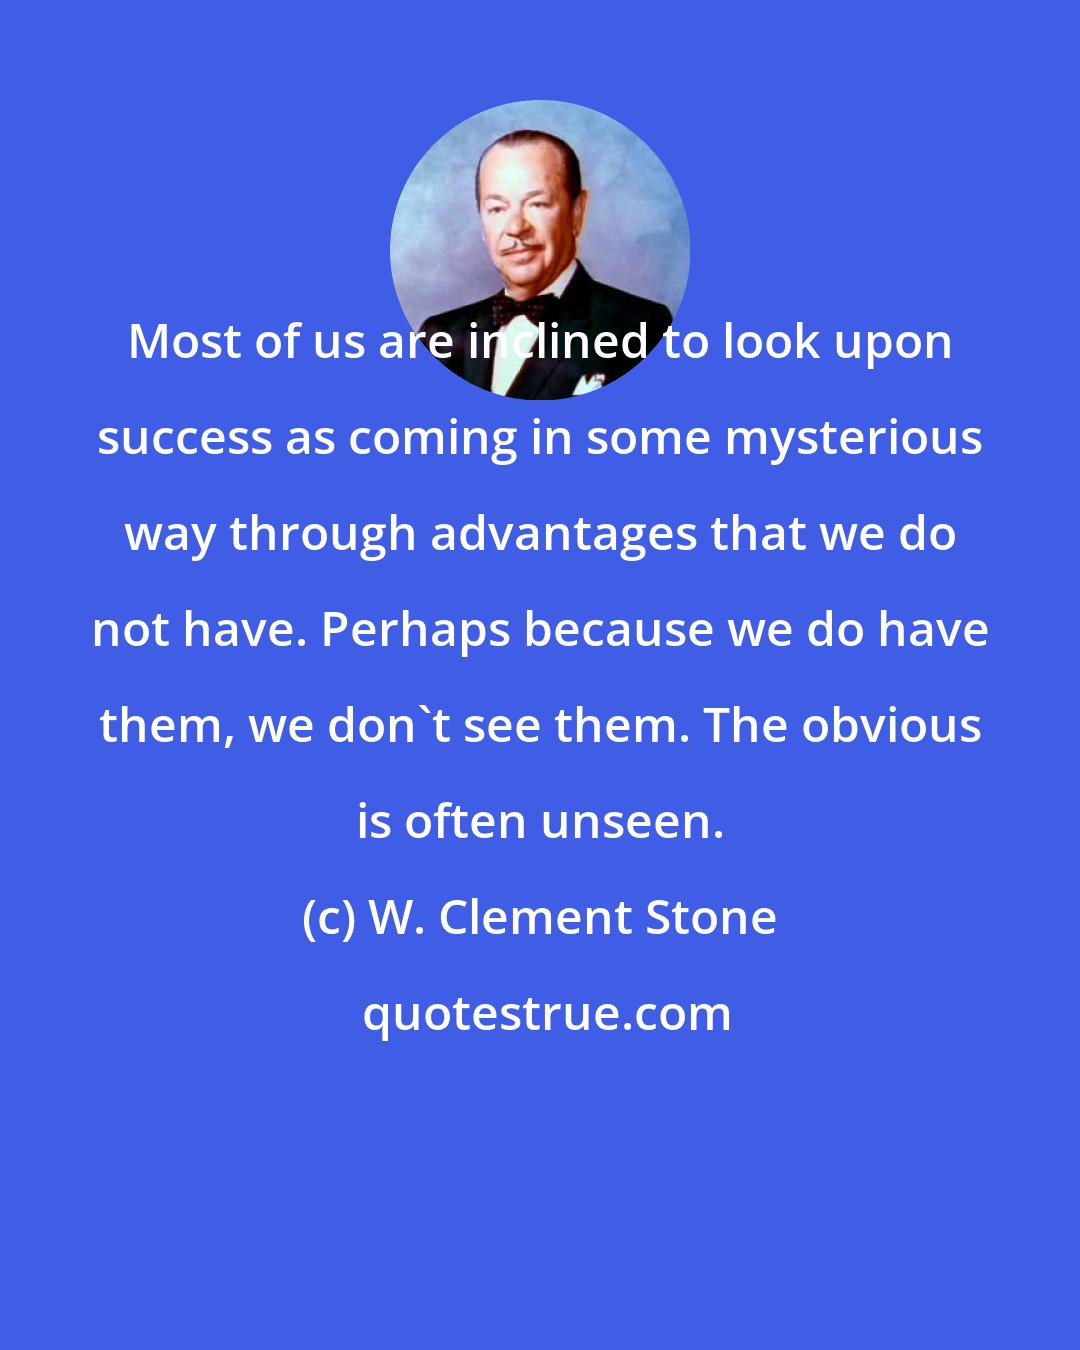 W. Clement Stone: Most of us are inclined to look upon success as coming in some mysterious way through advantages that we do not have. Perhaps because we do have them, we don't see them. The obvious is often unseen.